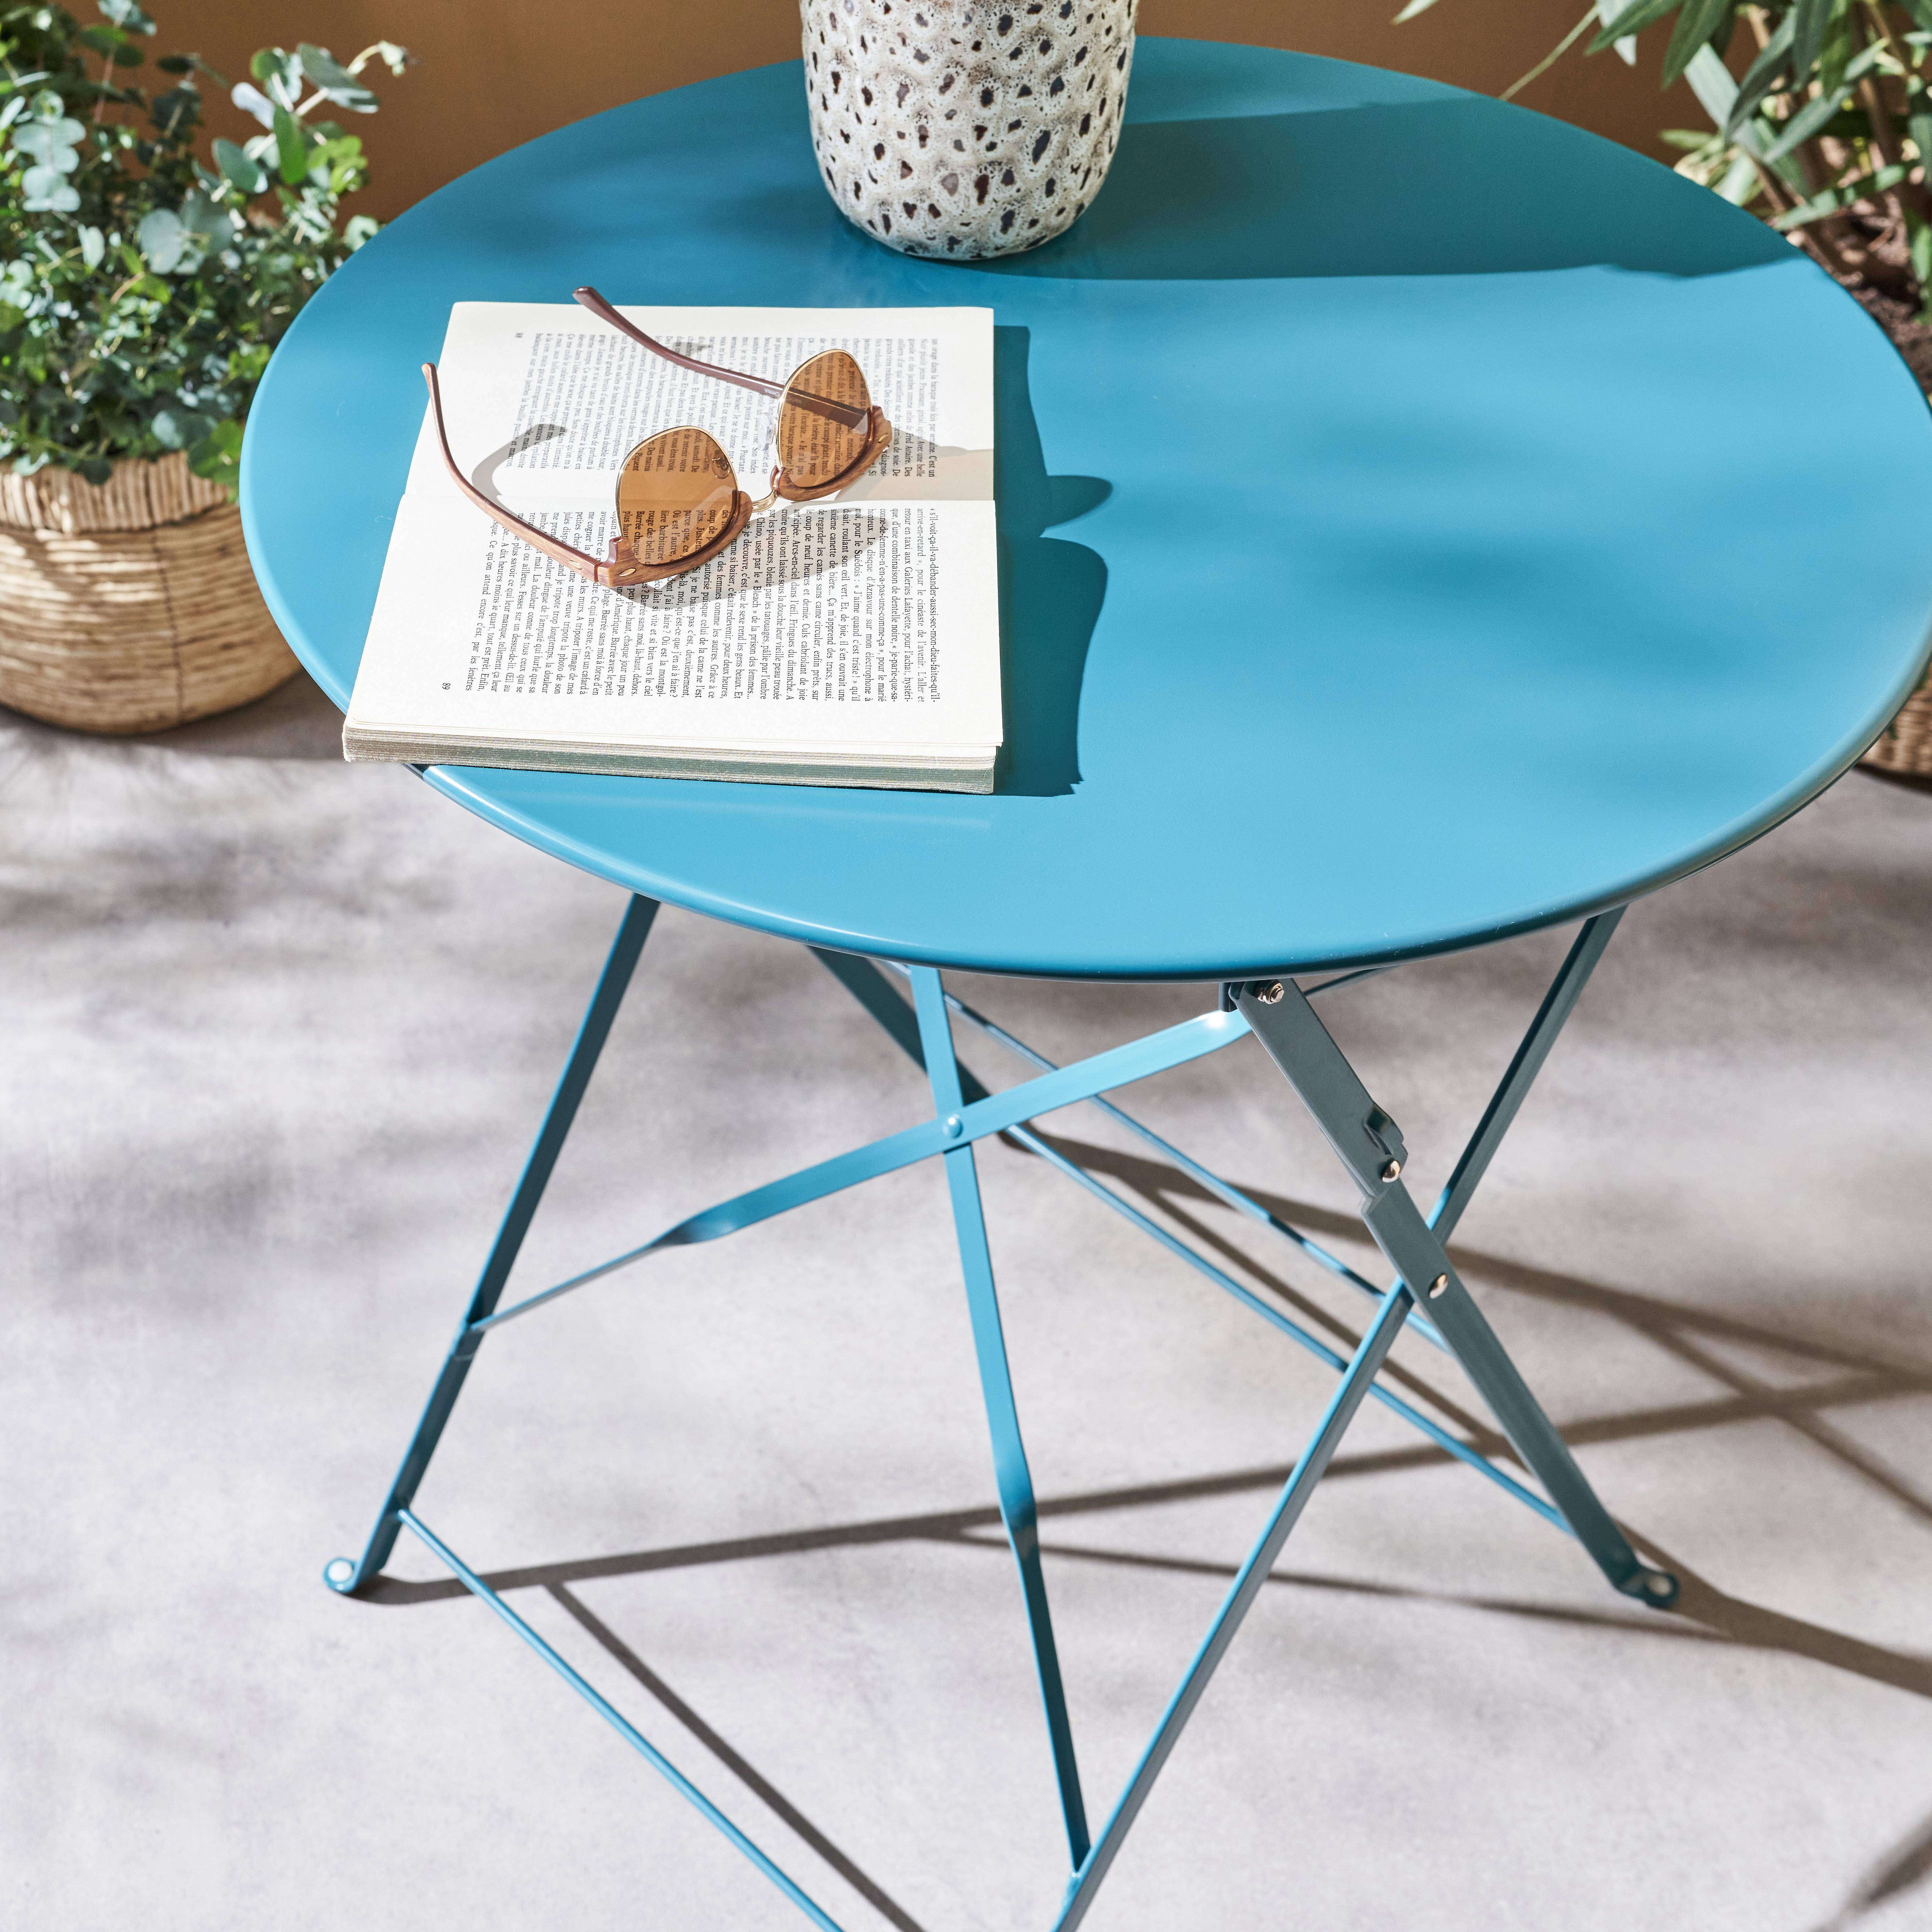 Foldable bistro garden table - Round Emilia duck blue - Round table Ø60cm, thermo-lacquered steel Photo2